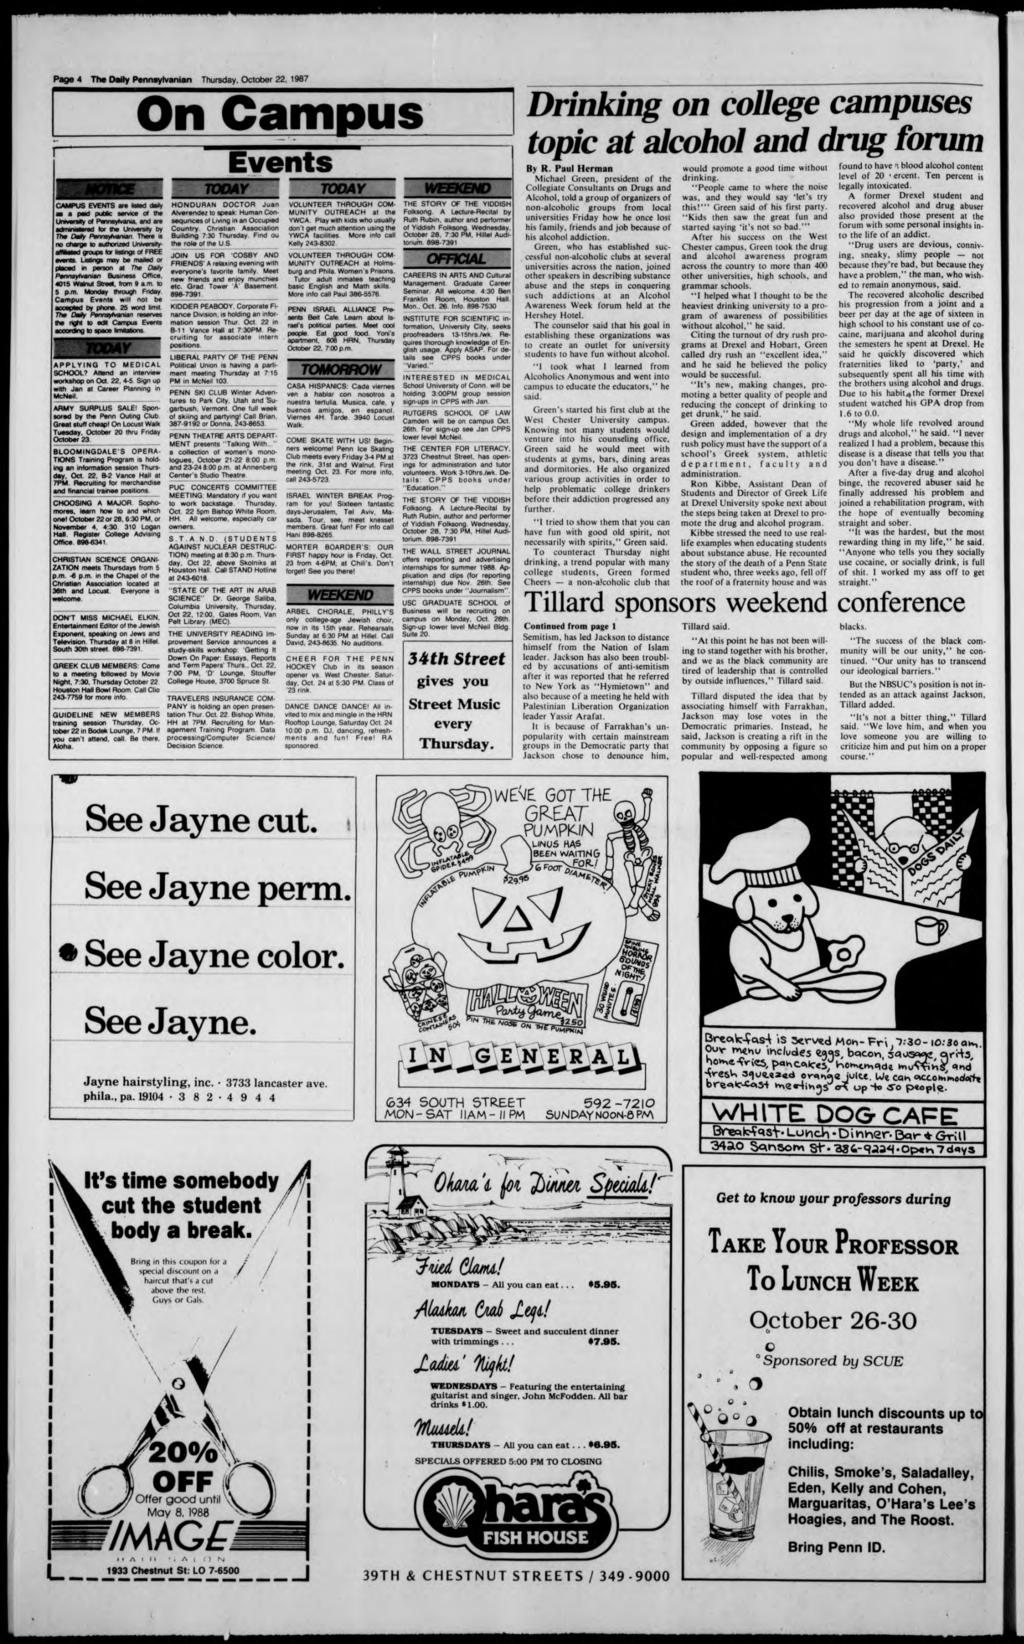 Page 4 Th«Daily Pannayh/anian Thursday. October 22. 1987 On Campus CAMPOS EVENTS are ksted daily m a part puttc MTVKS of the UrevwMy of PannsyNania.